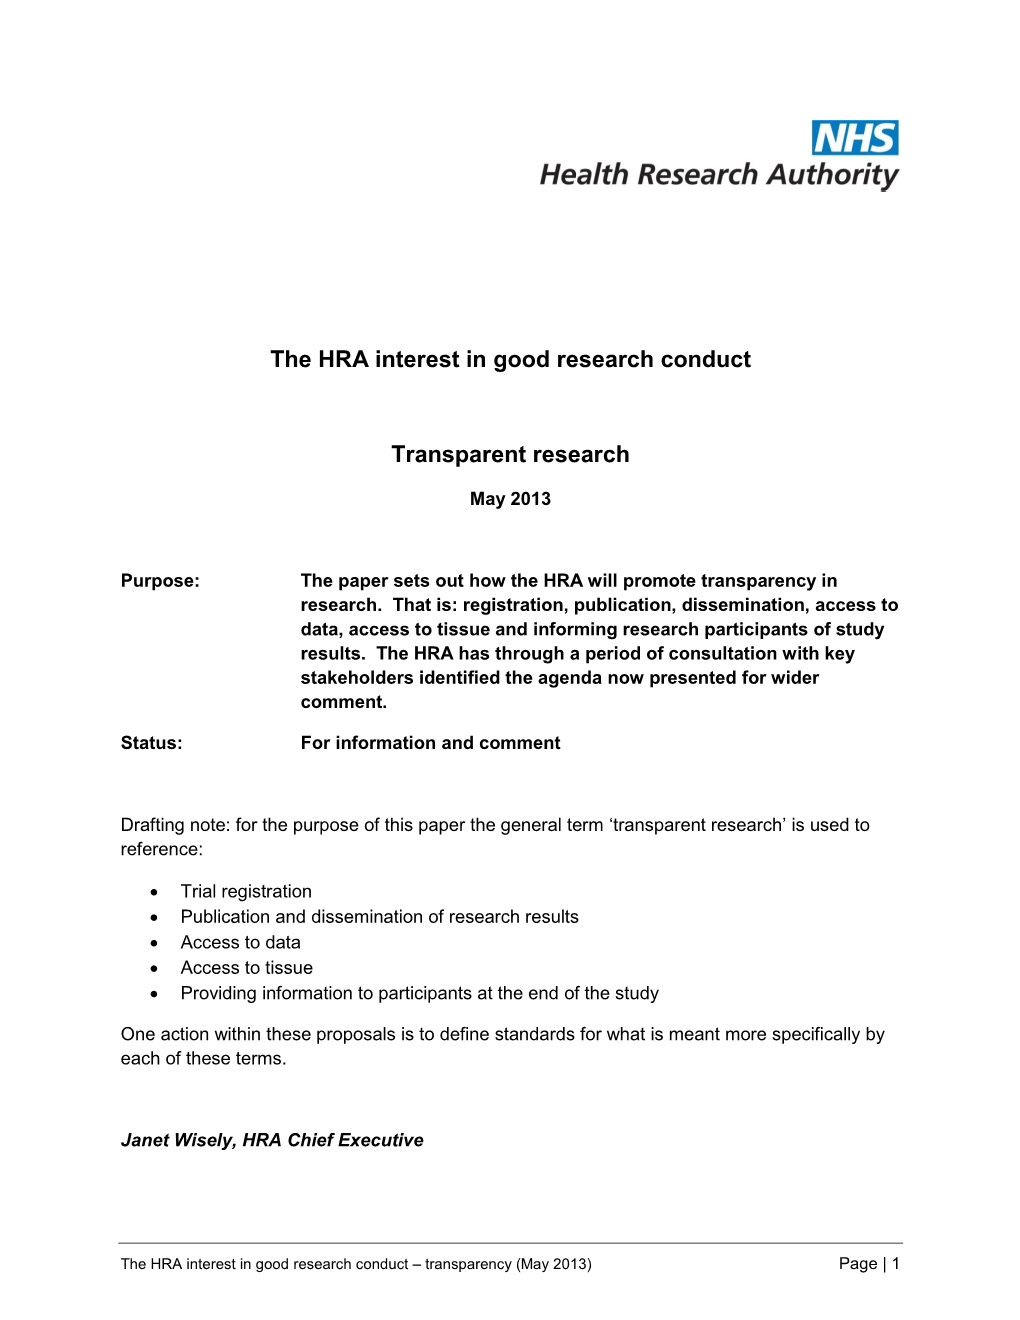 The HRA Interest in Good Research Conduct Transparent